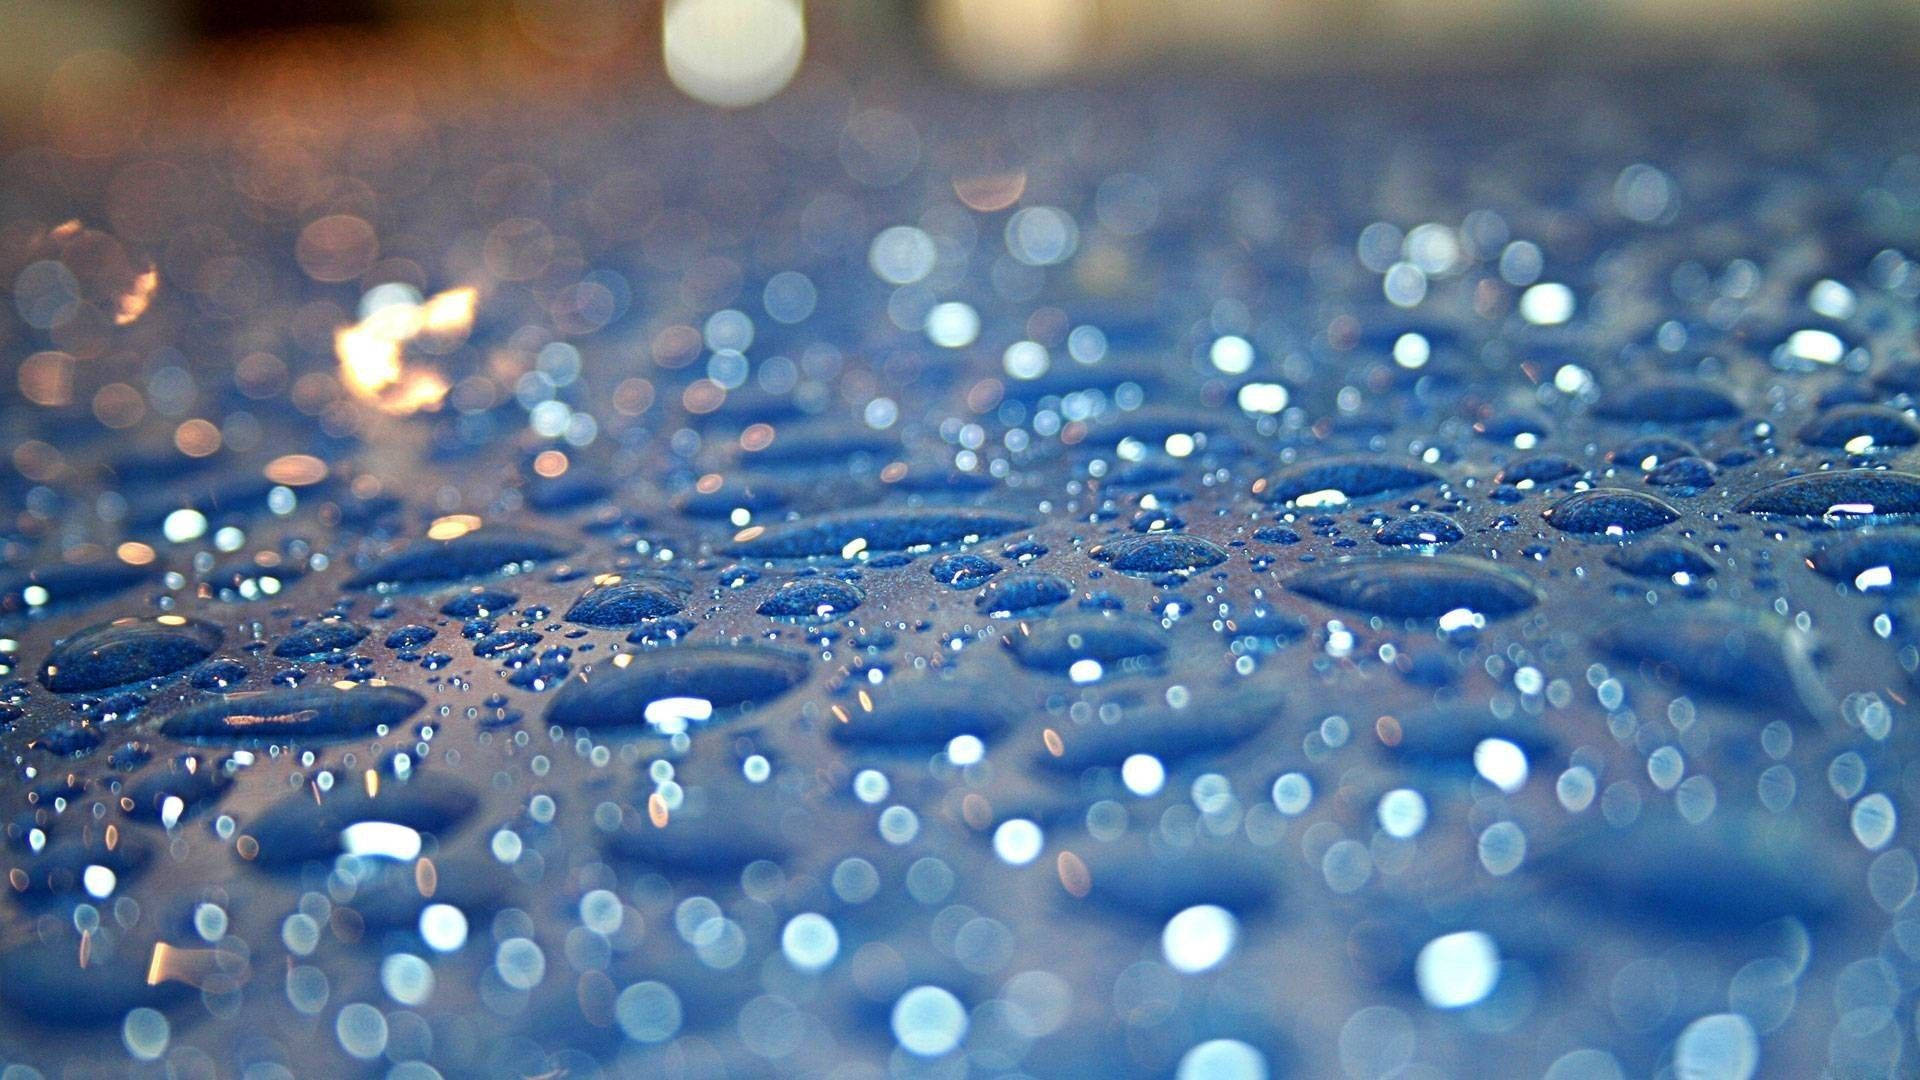 Download Beautiful Rain Droplets On A Surface Wallpaper Wallpapers.com ...